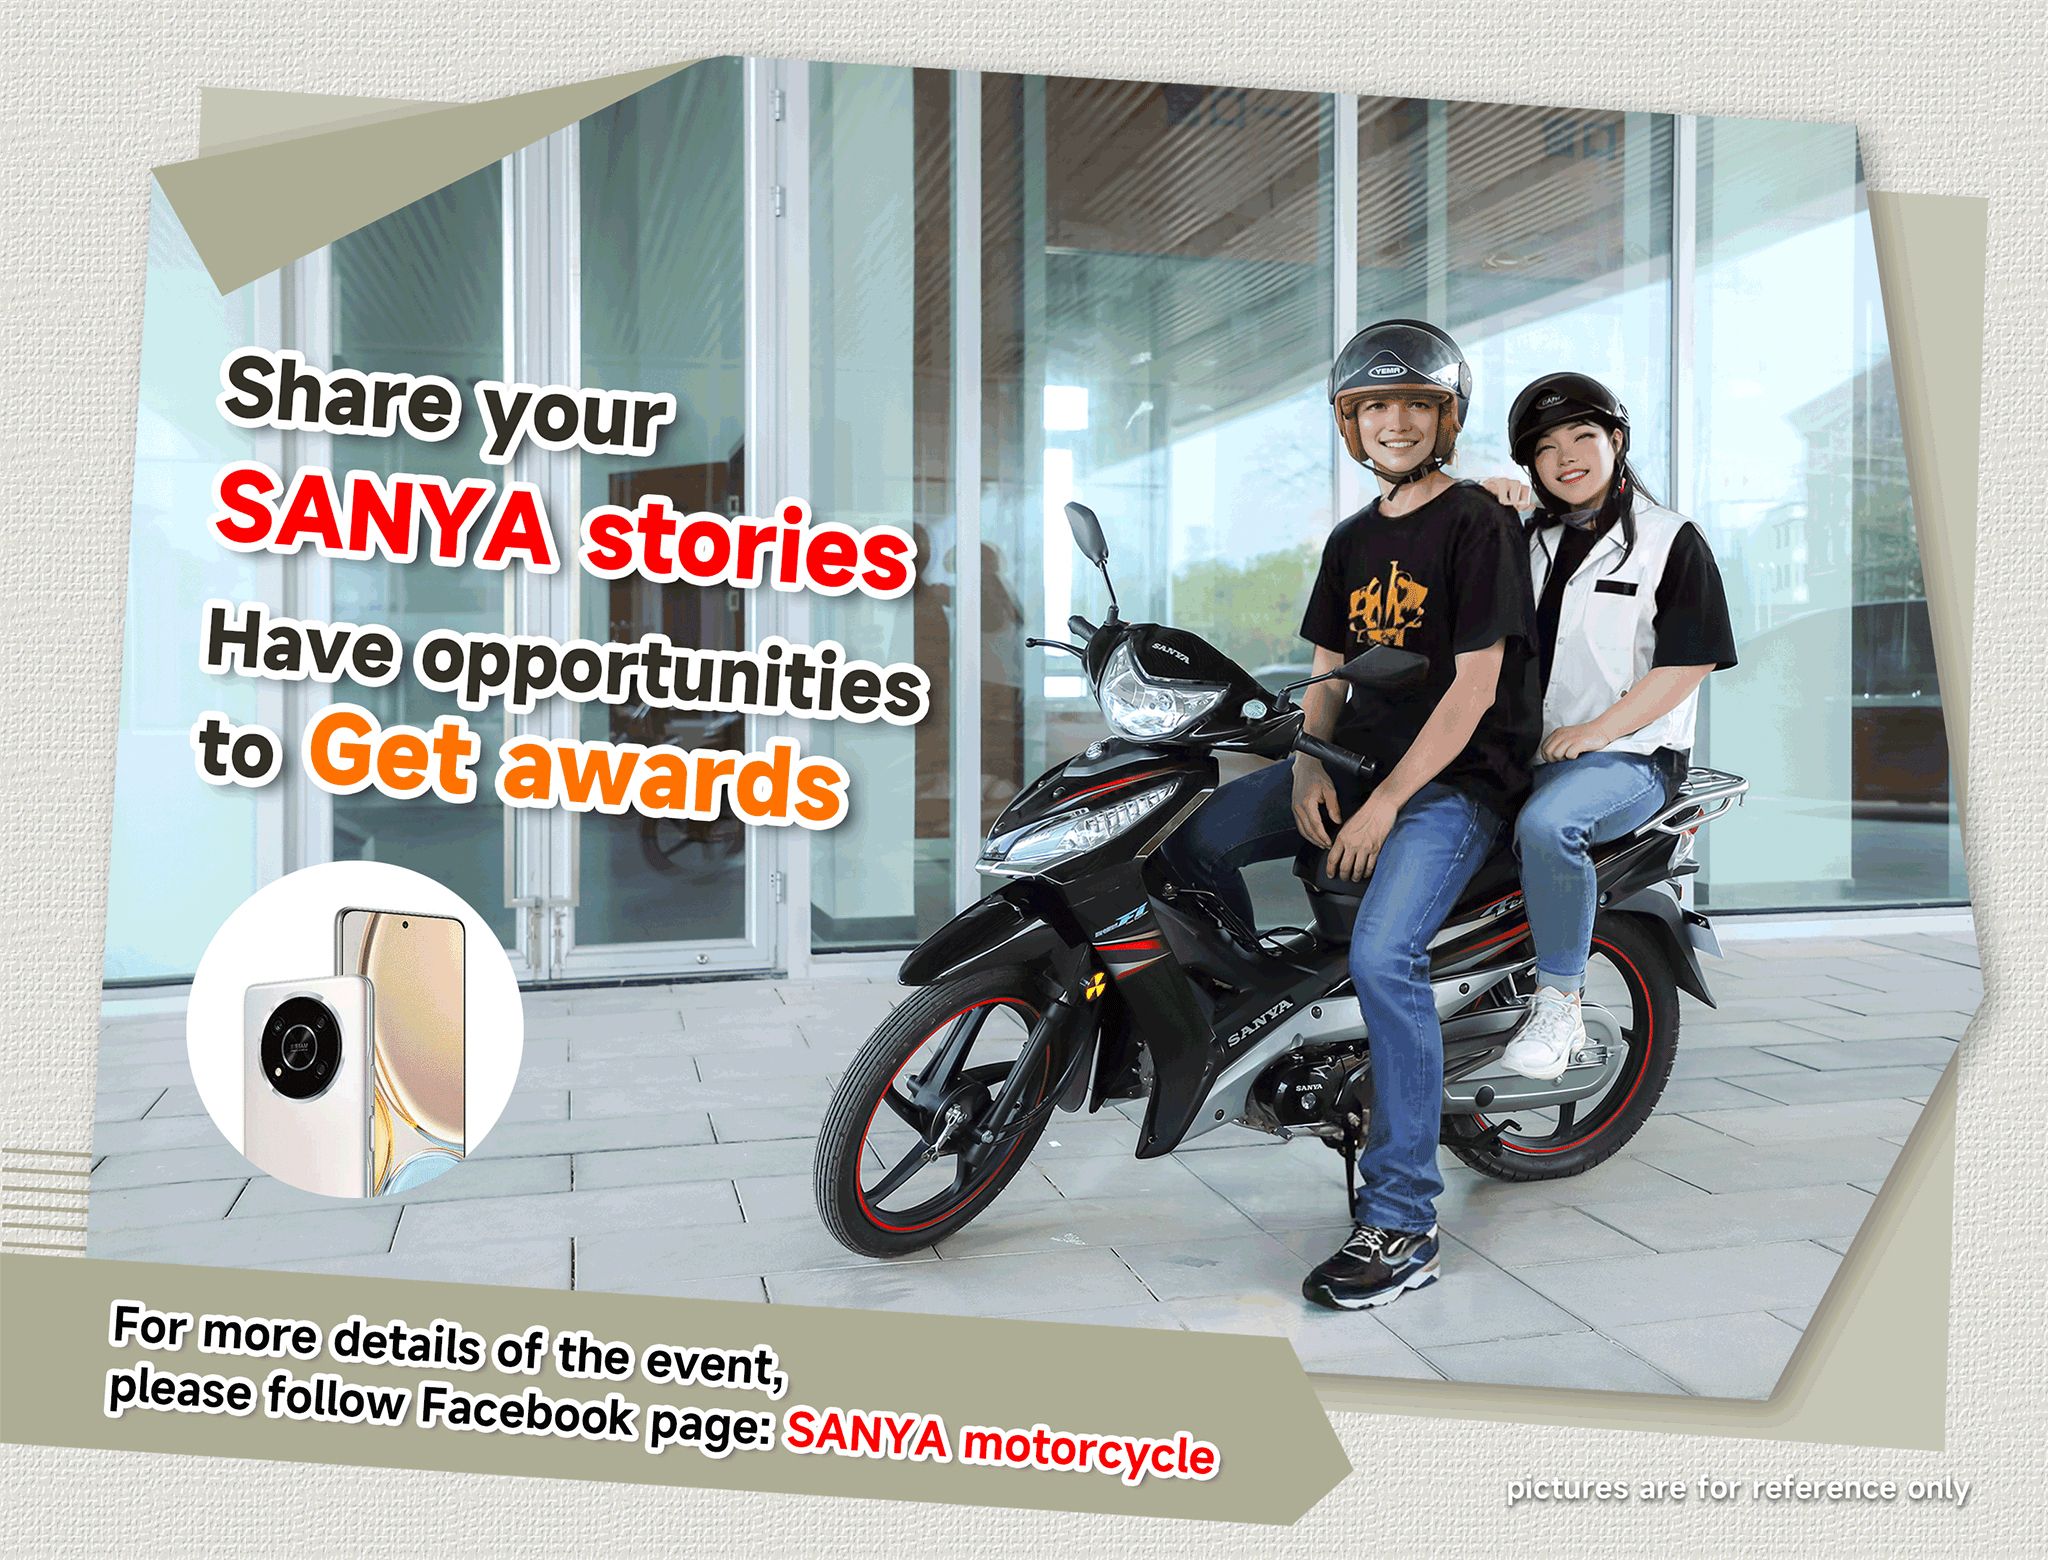 Share your SANYA stories, have opportunities to get awards!